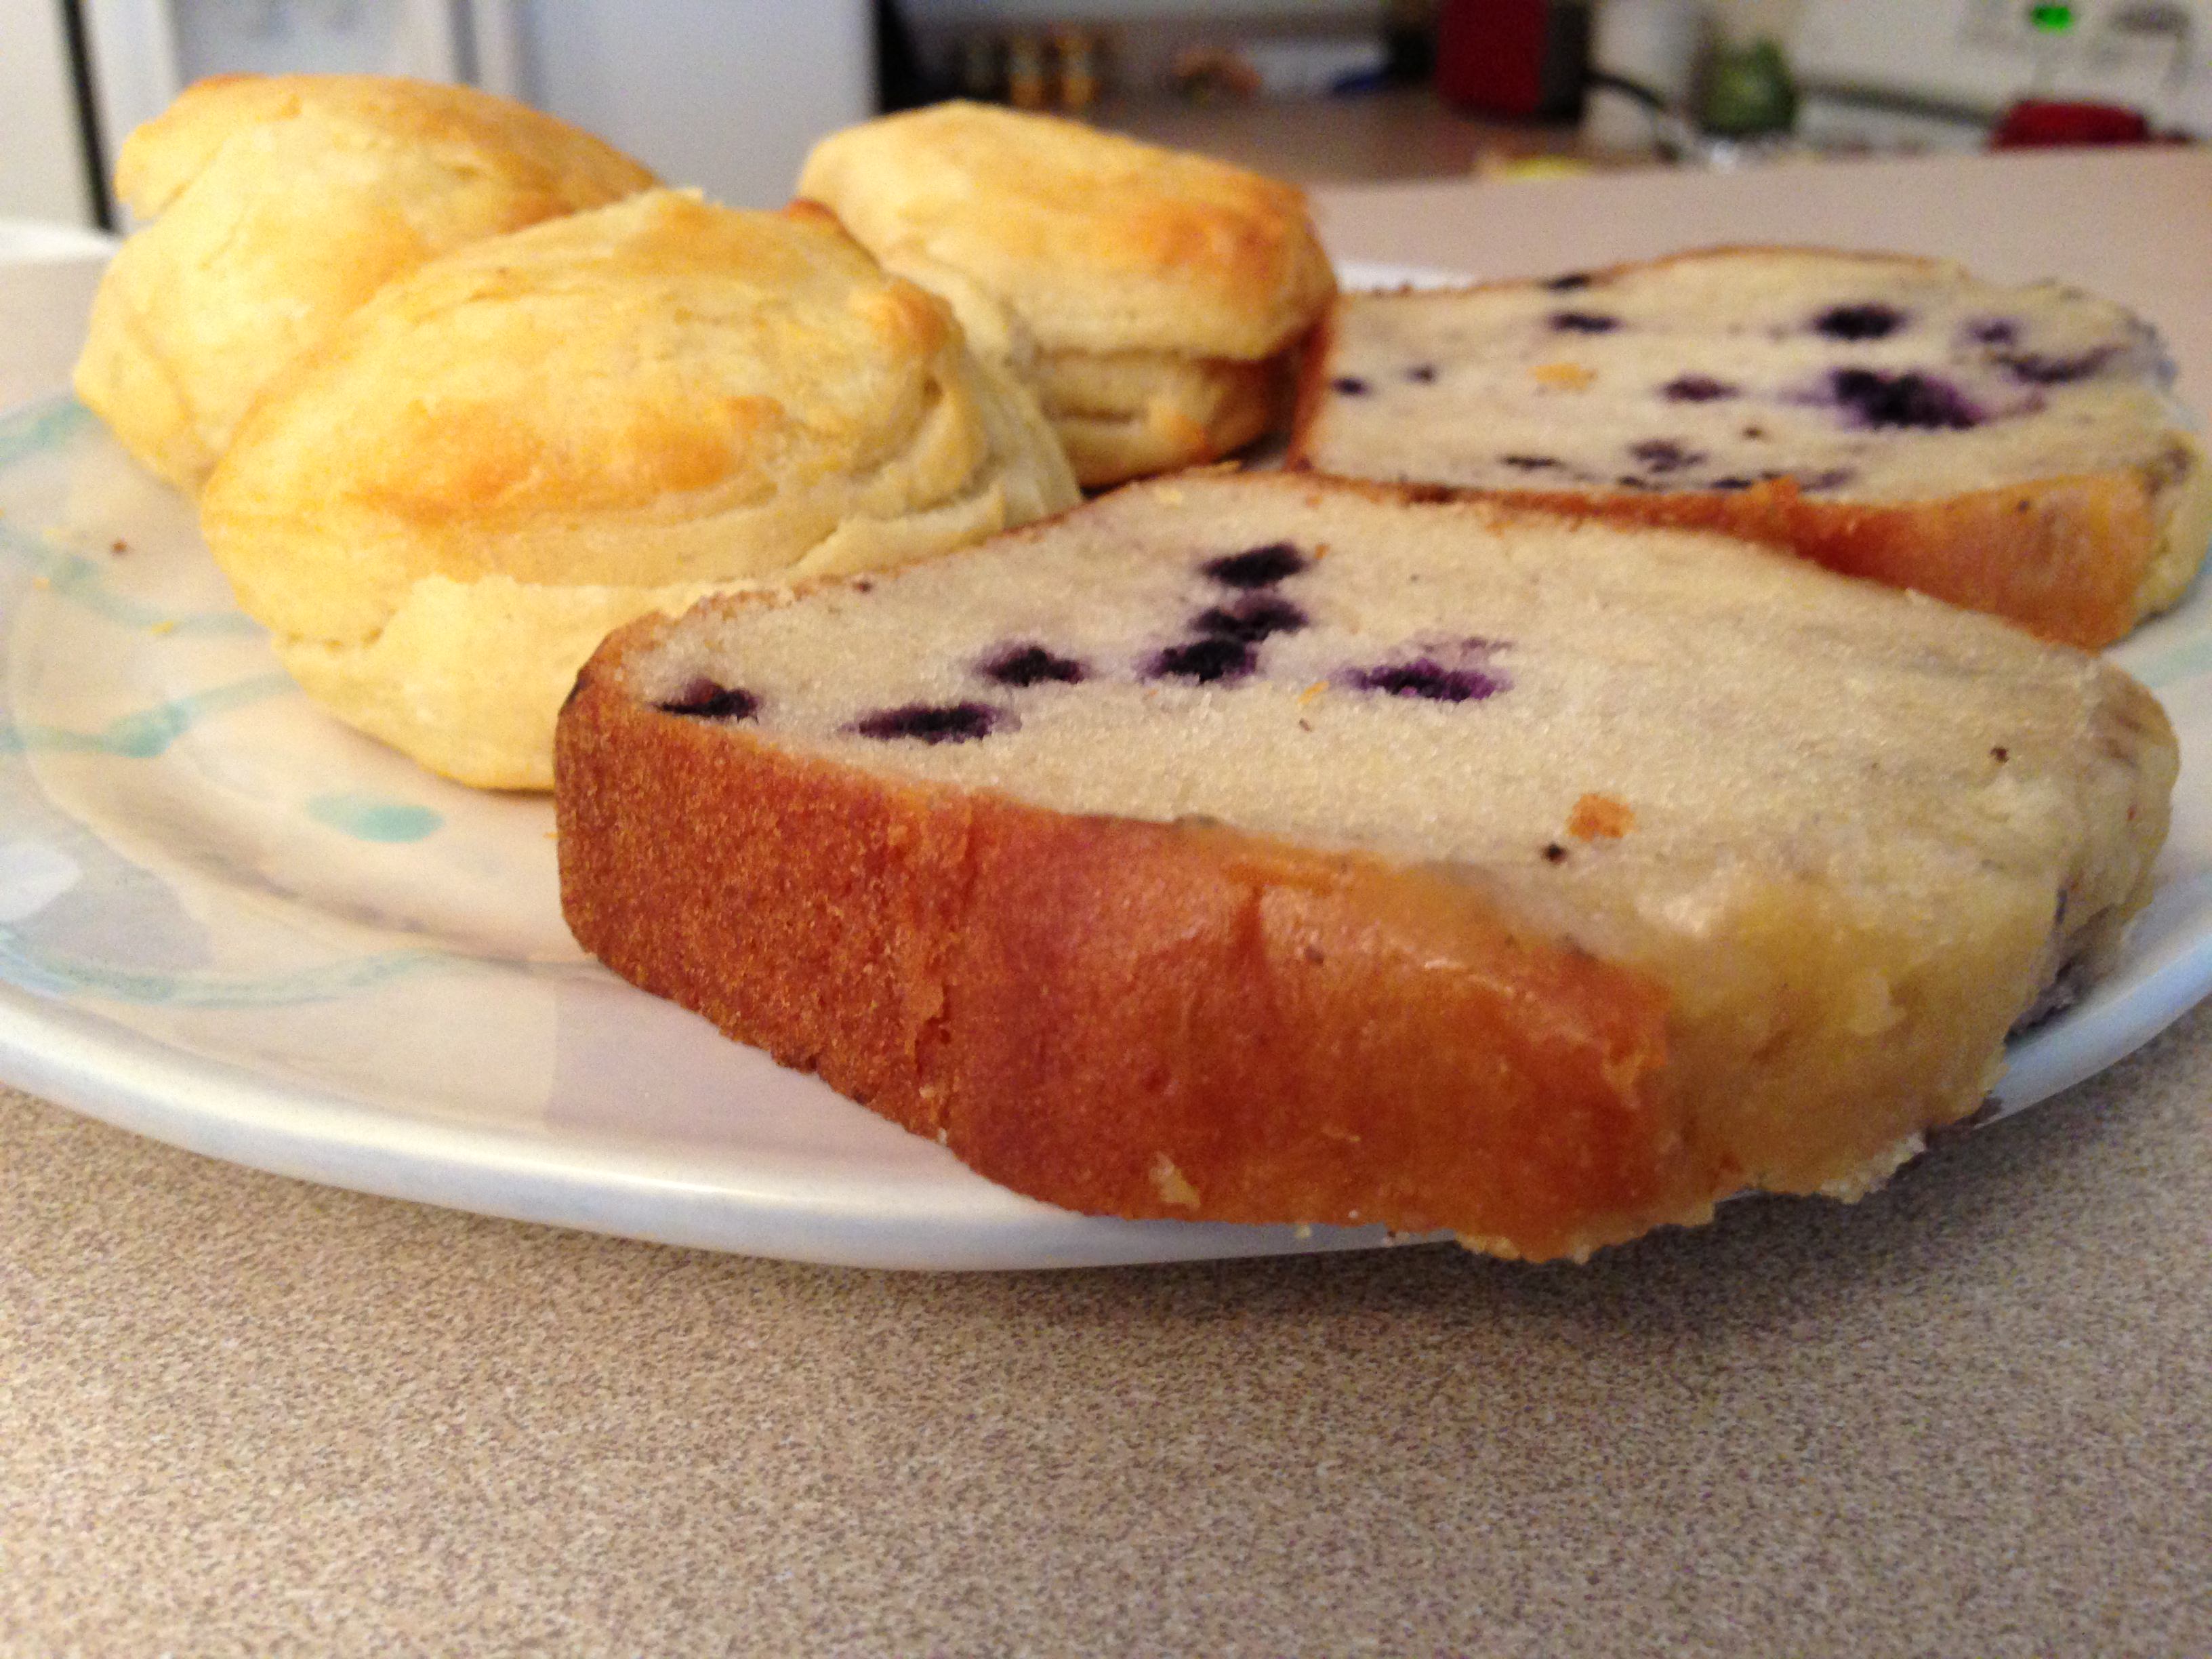 Blueberry Pound Cake And Biscuits!